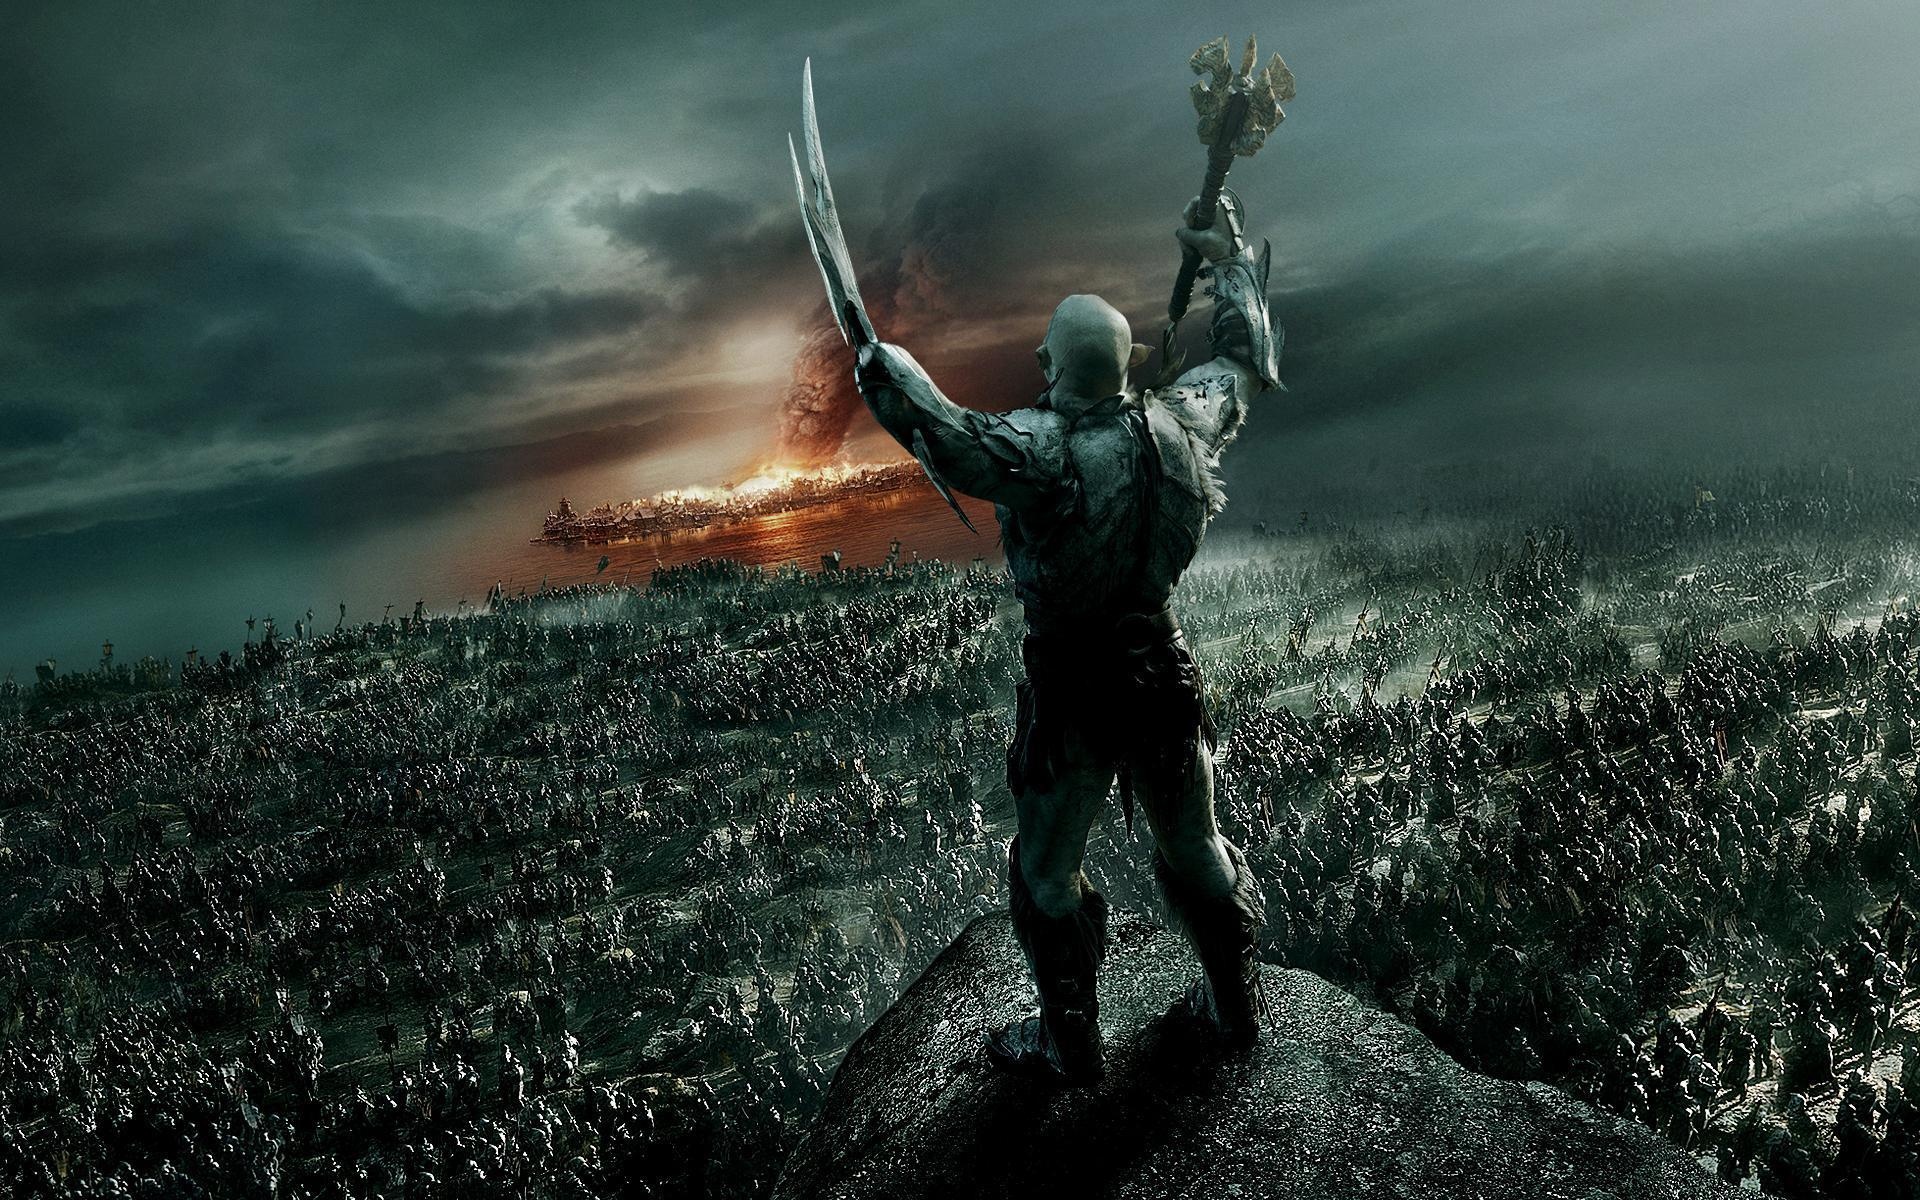 The Hobbit (Movie): Azog, An Orc-chieftain of Moria, A giant Orc with heavy armor. 1920x1200 HD Wallpaper.